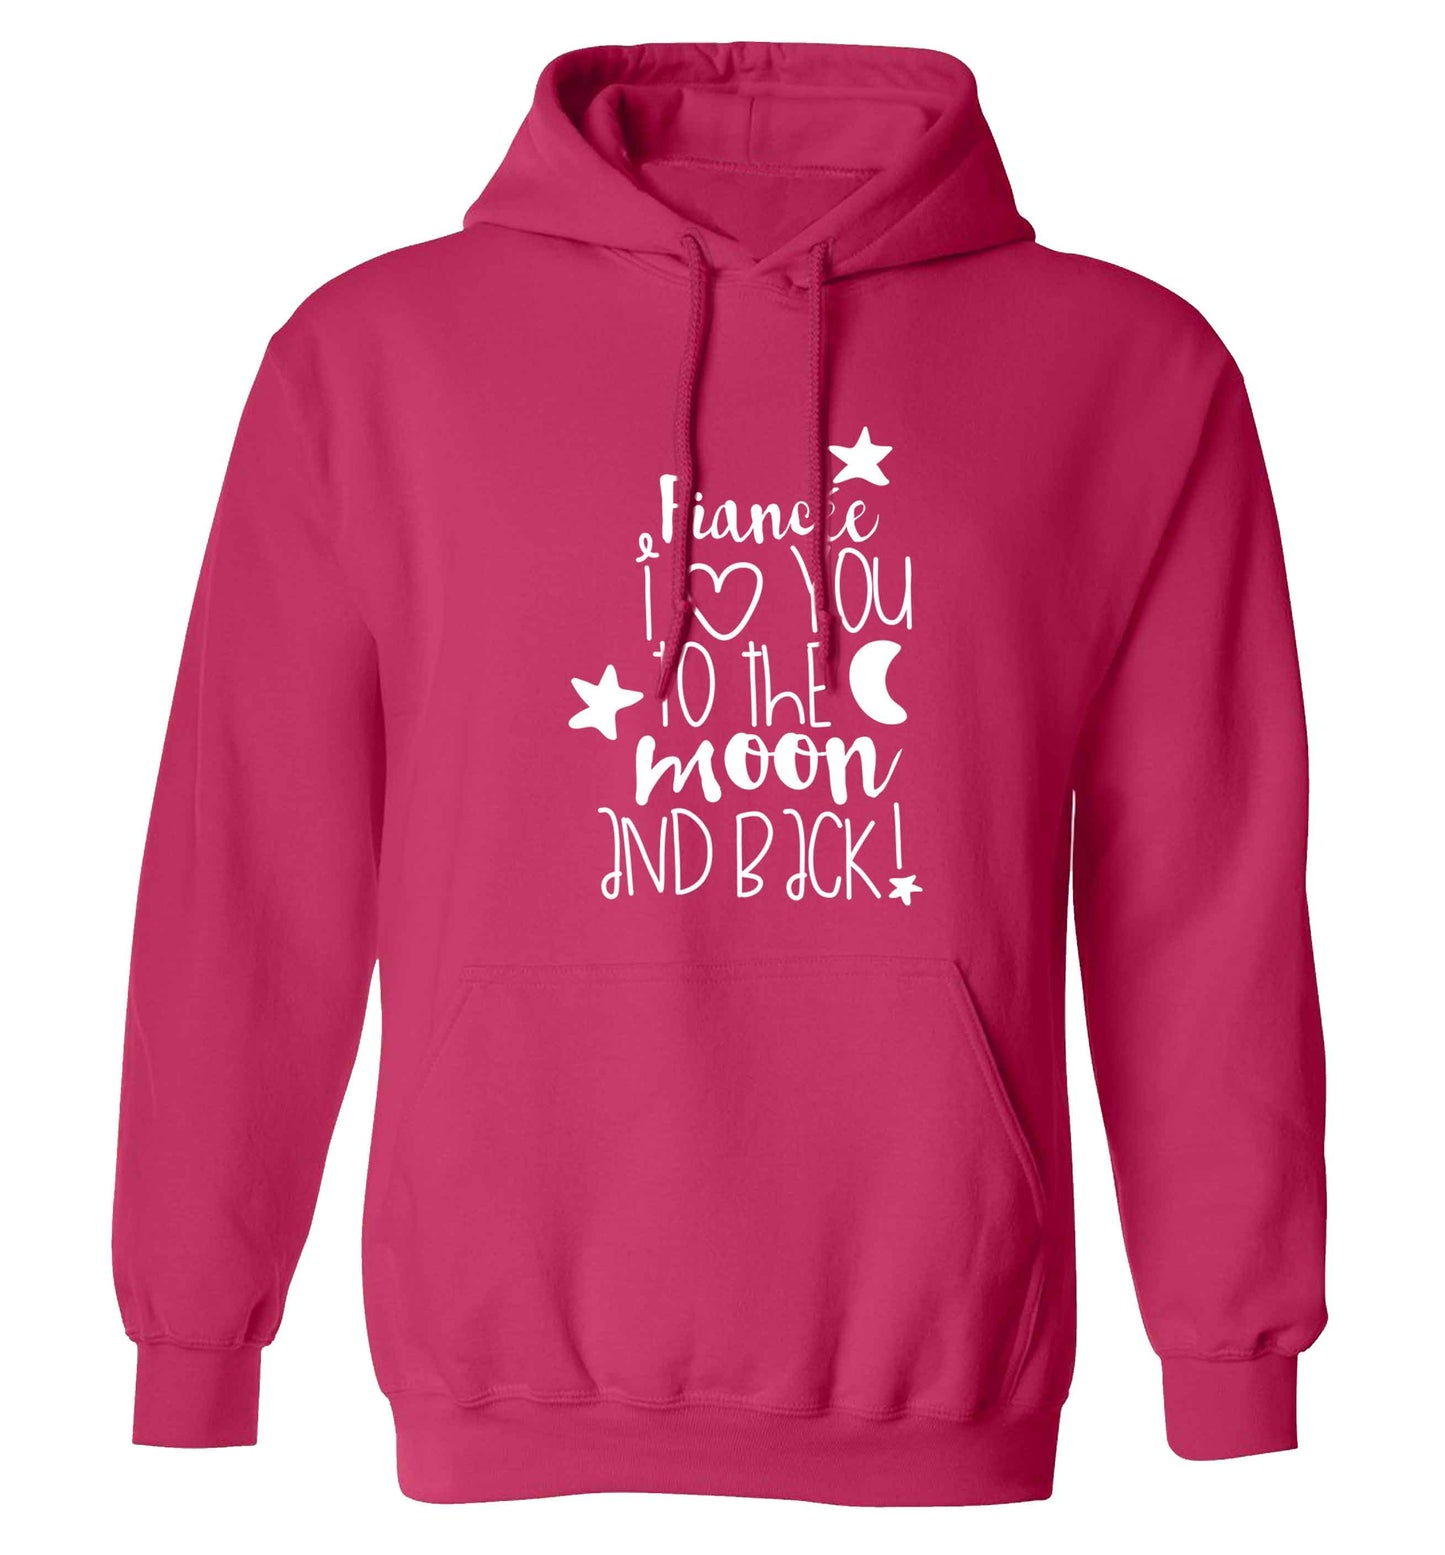 Fianc√©e I love you to the moon and back adults unisex pink hoodie 2XL